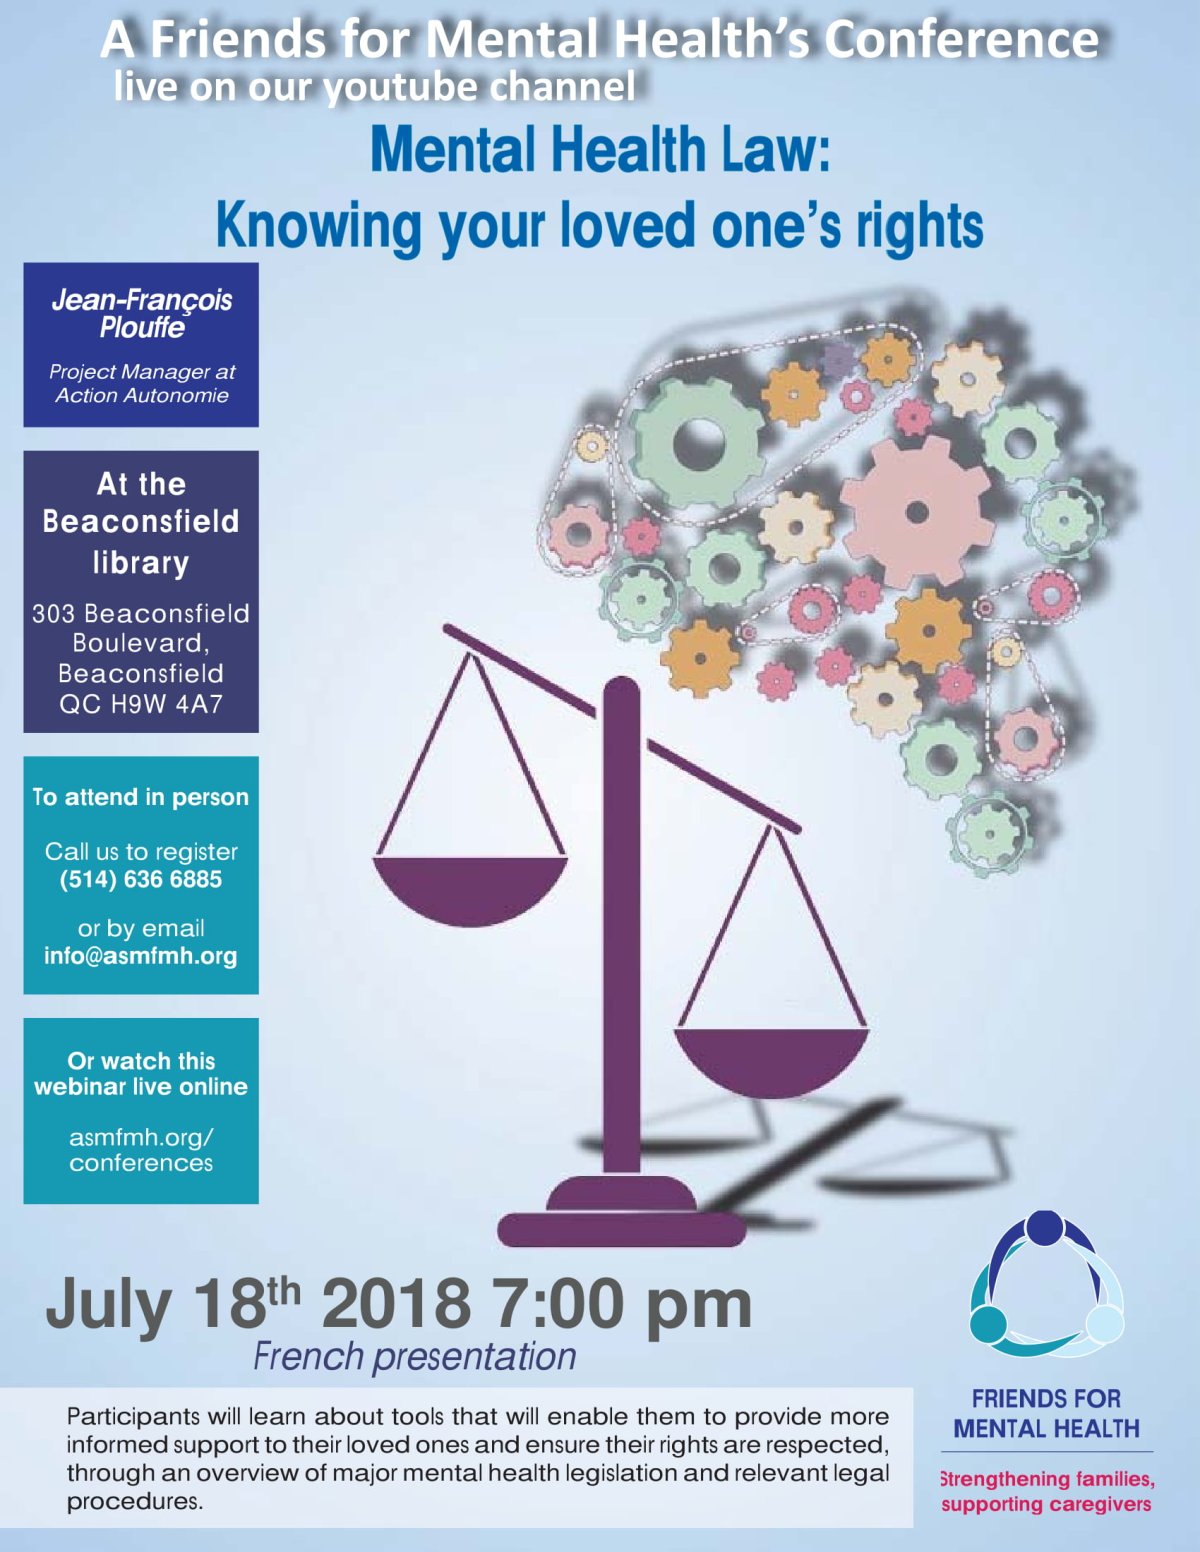 Mental Health Law: Knowing your loved one’s rights - image